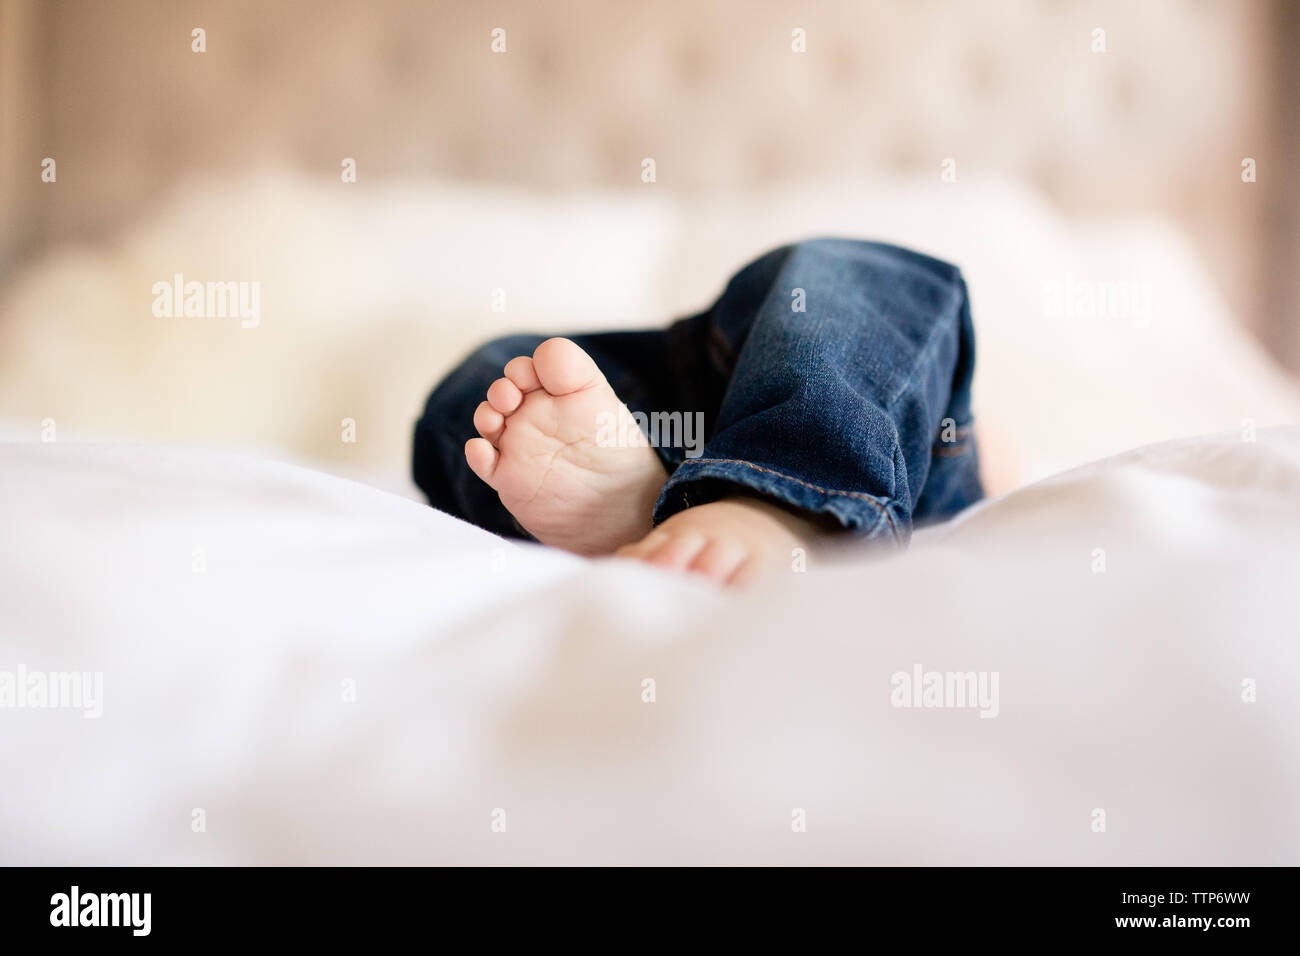 Baby toes peeking out from denim jeans on bed indoors Stock Photo